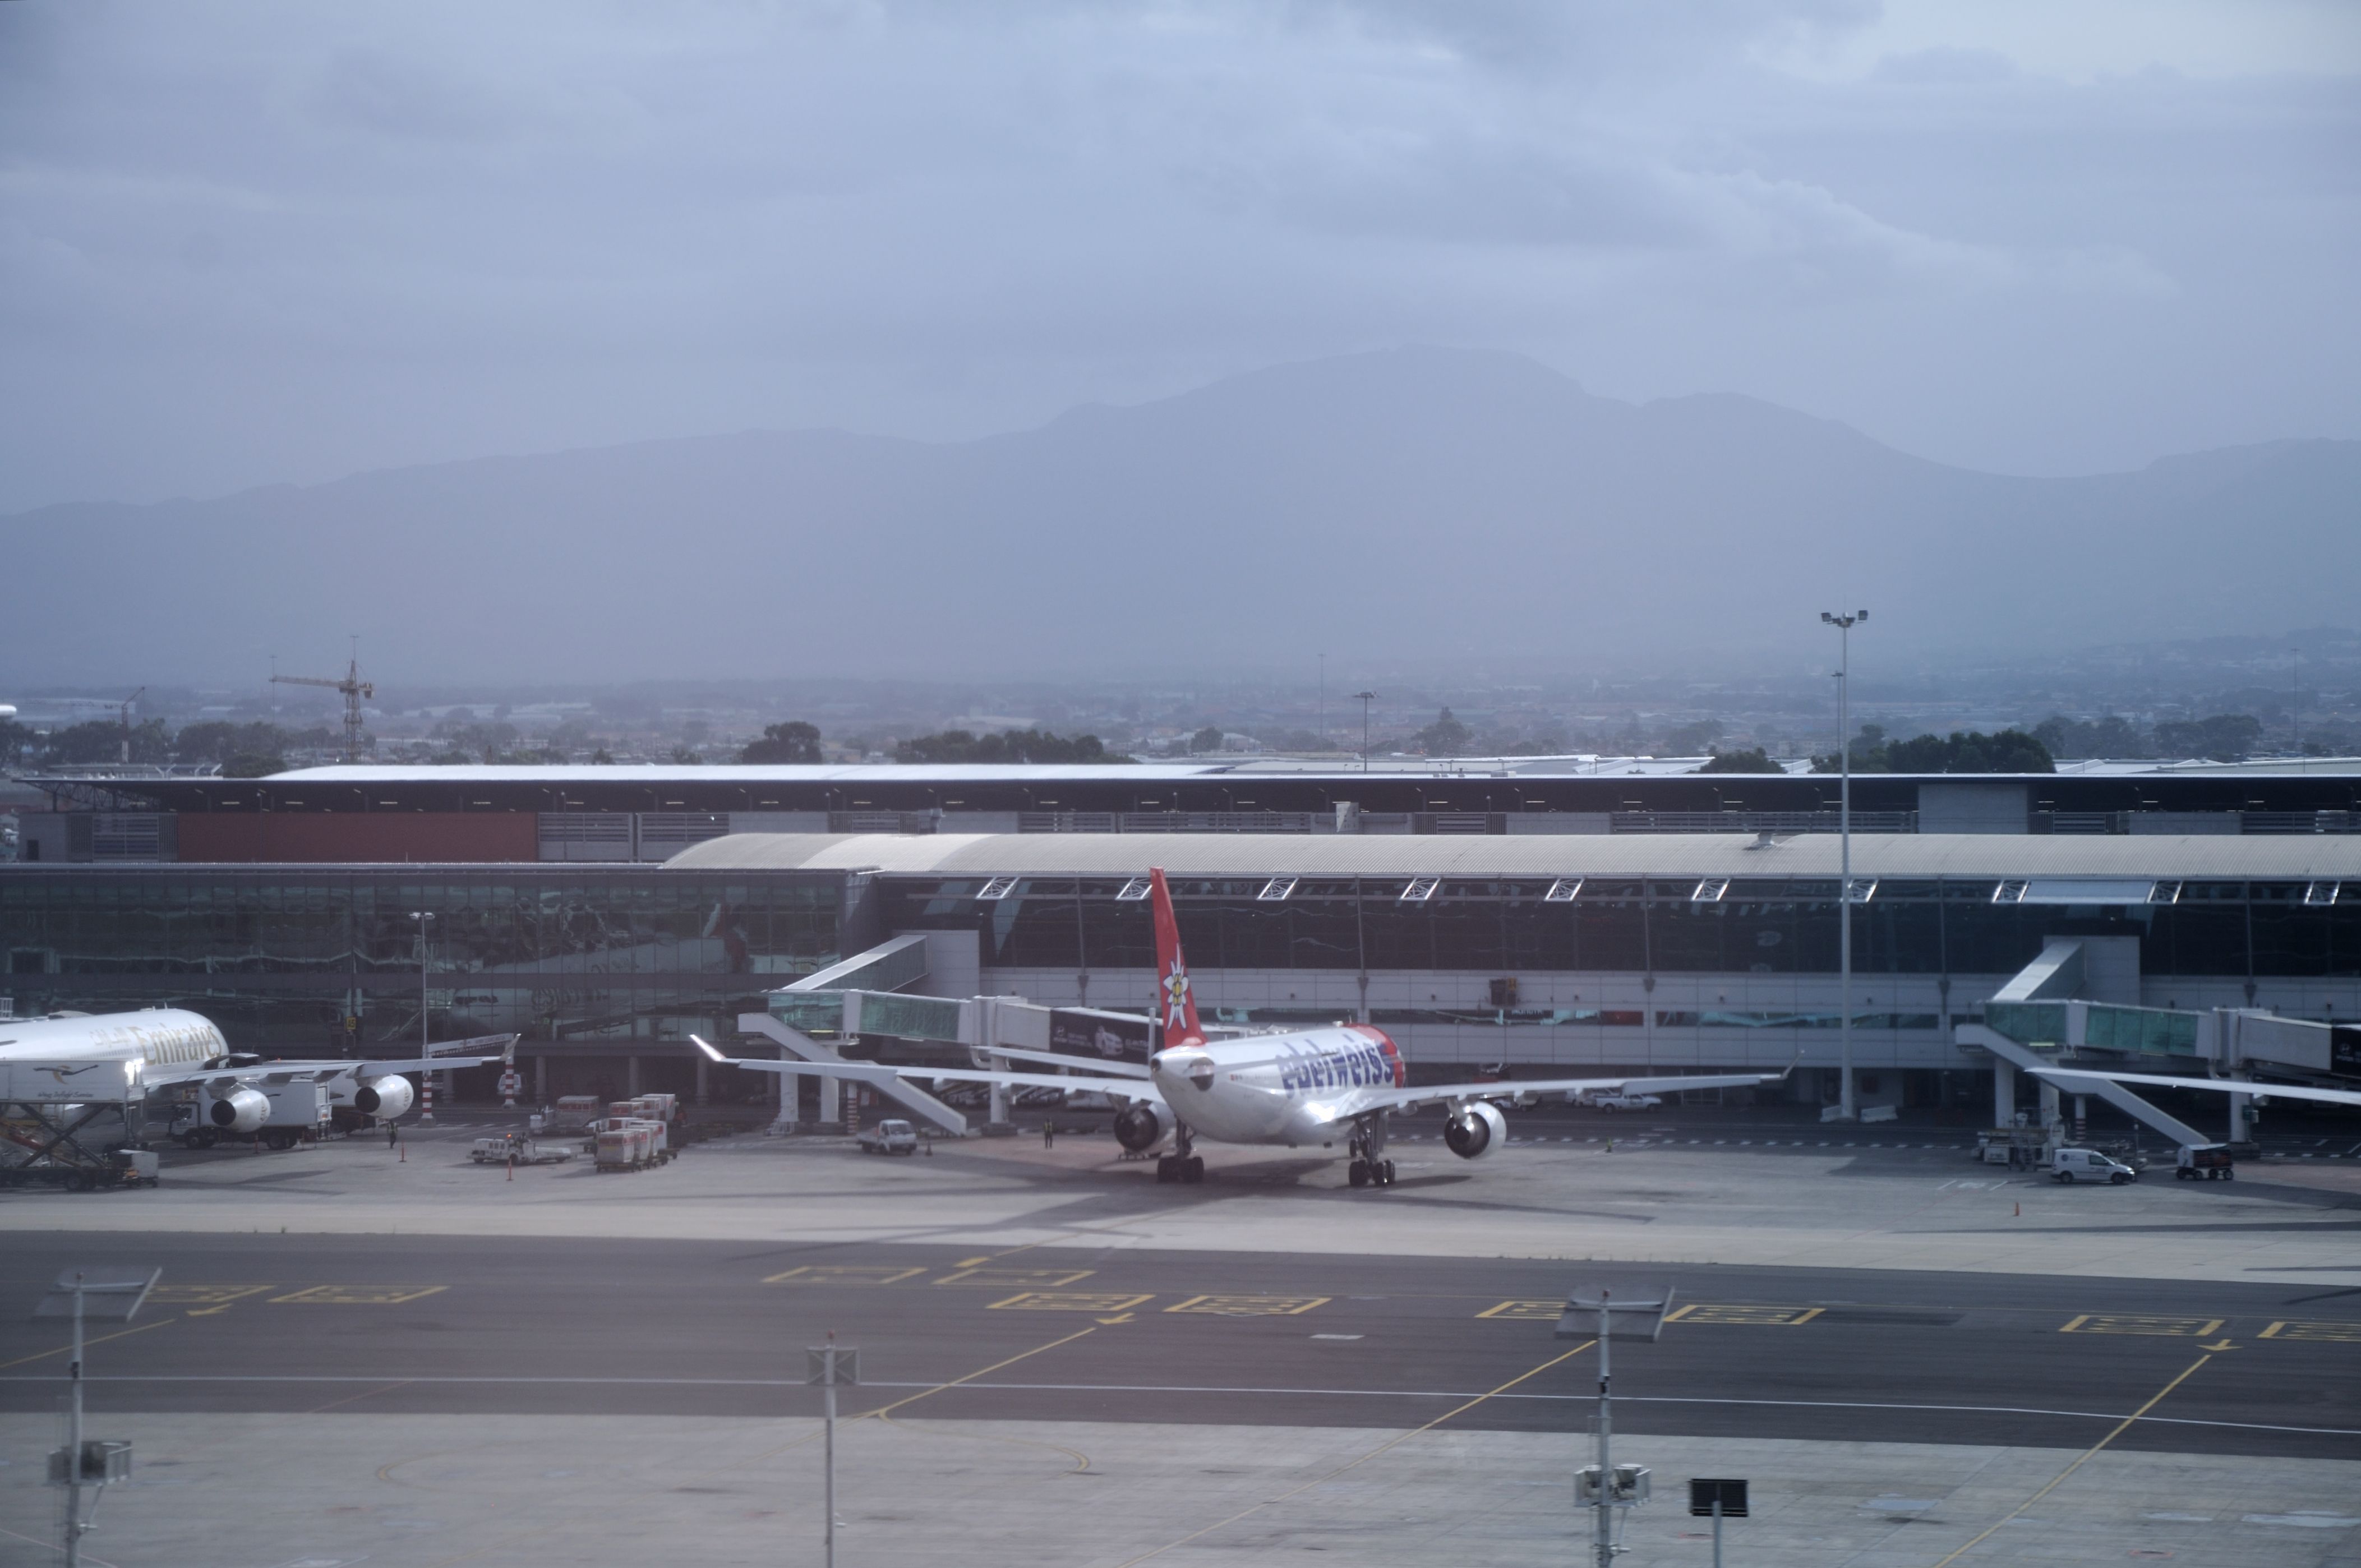 Planes parked at Cape Town International Airport